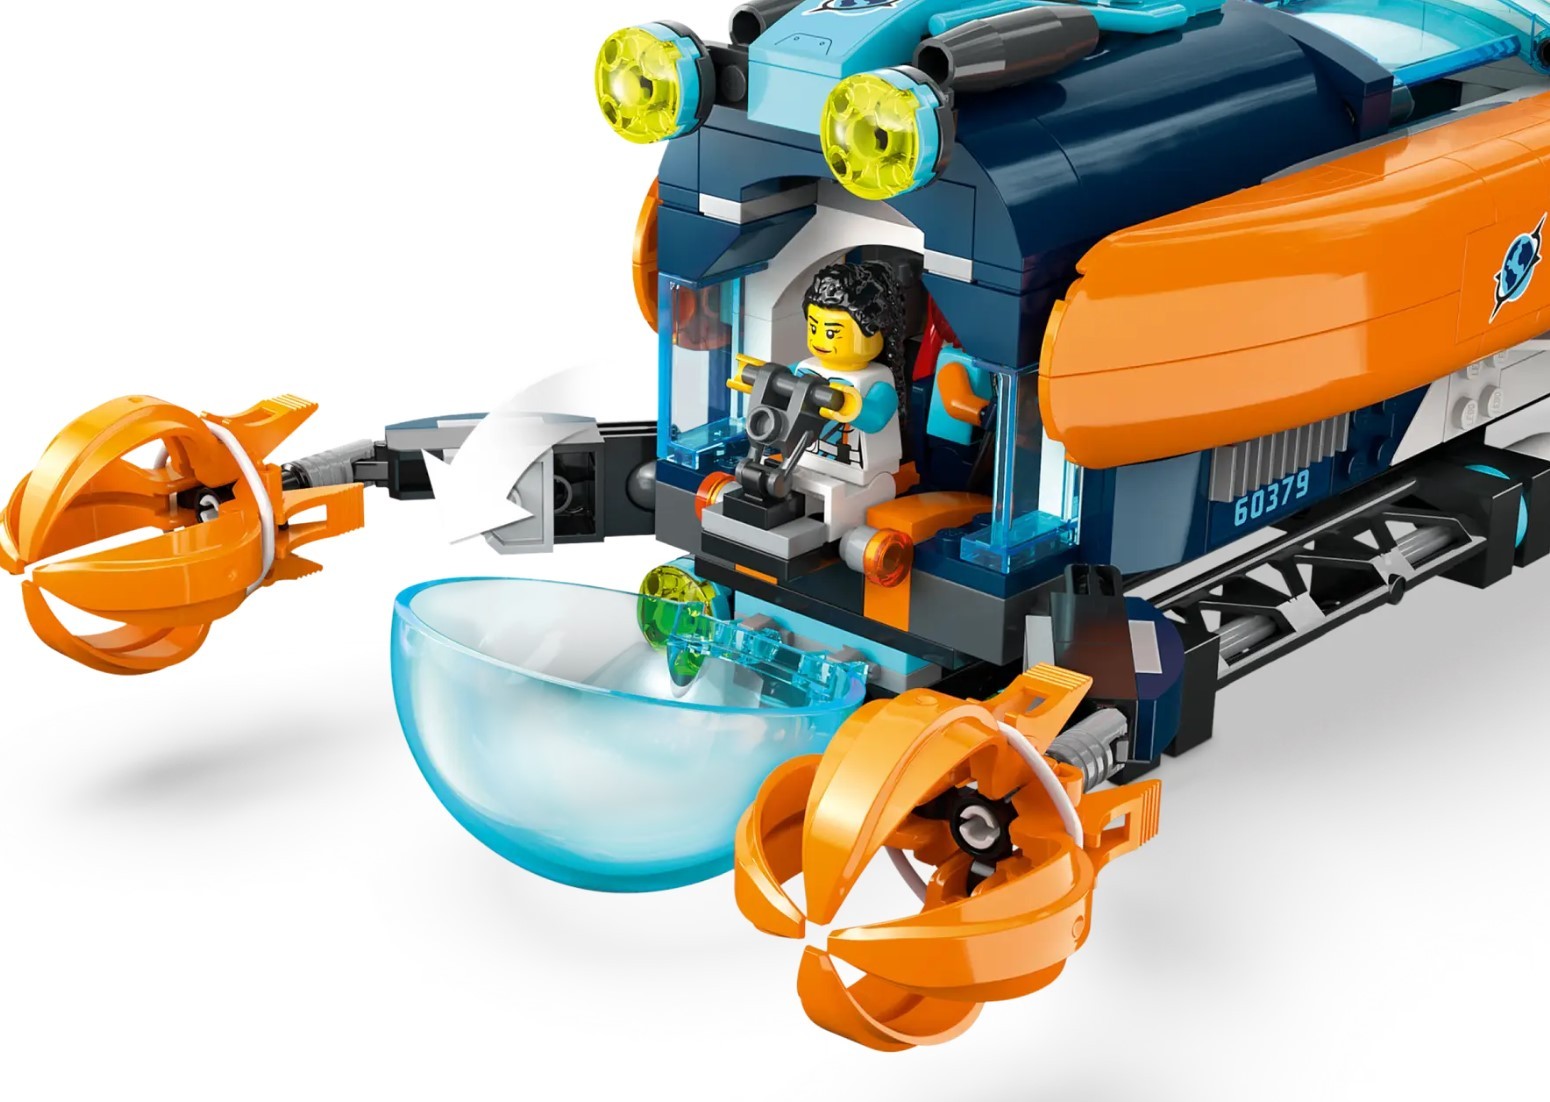 This Upcoming LEGO Submarine Is a Feature-Packed Toy Focusing on ...